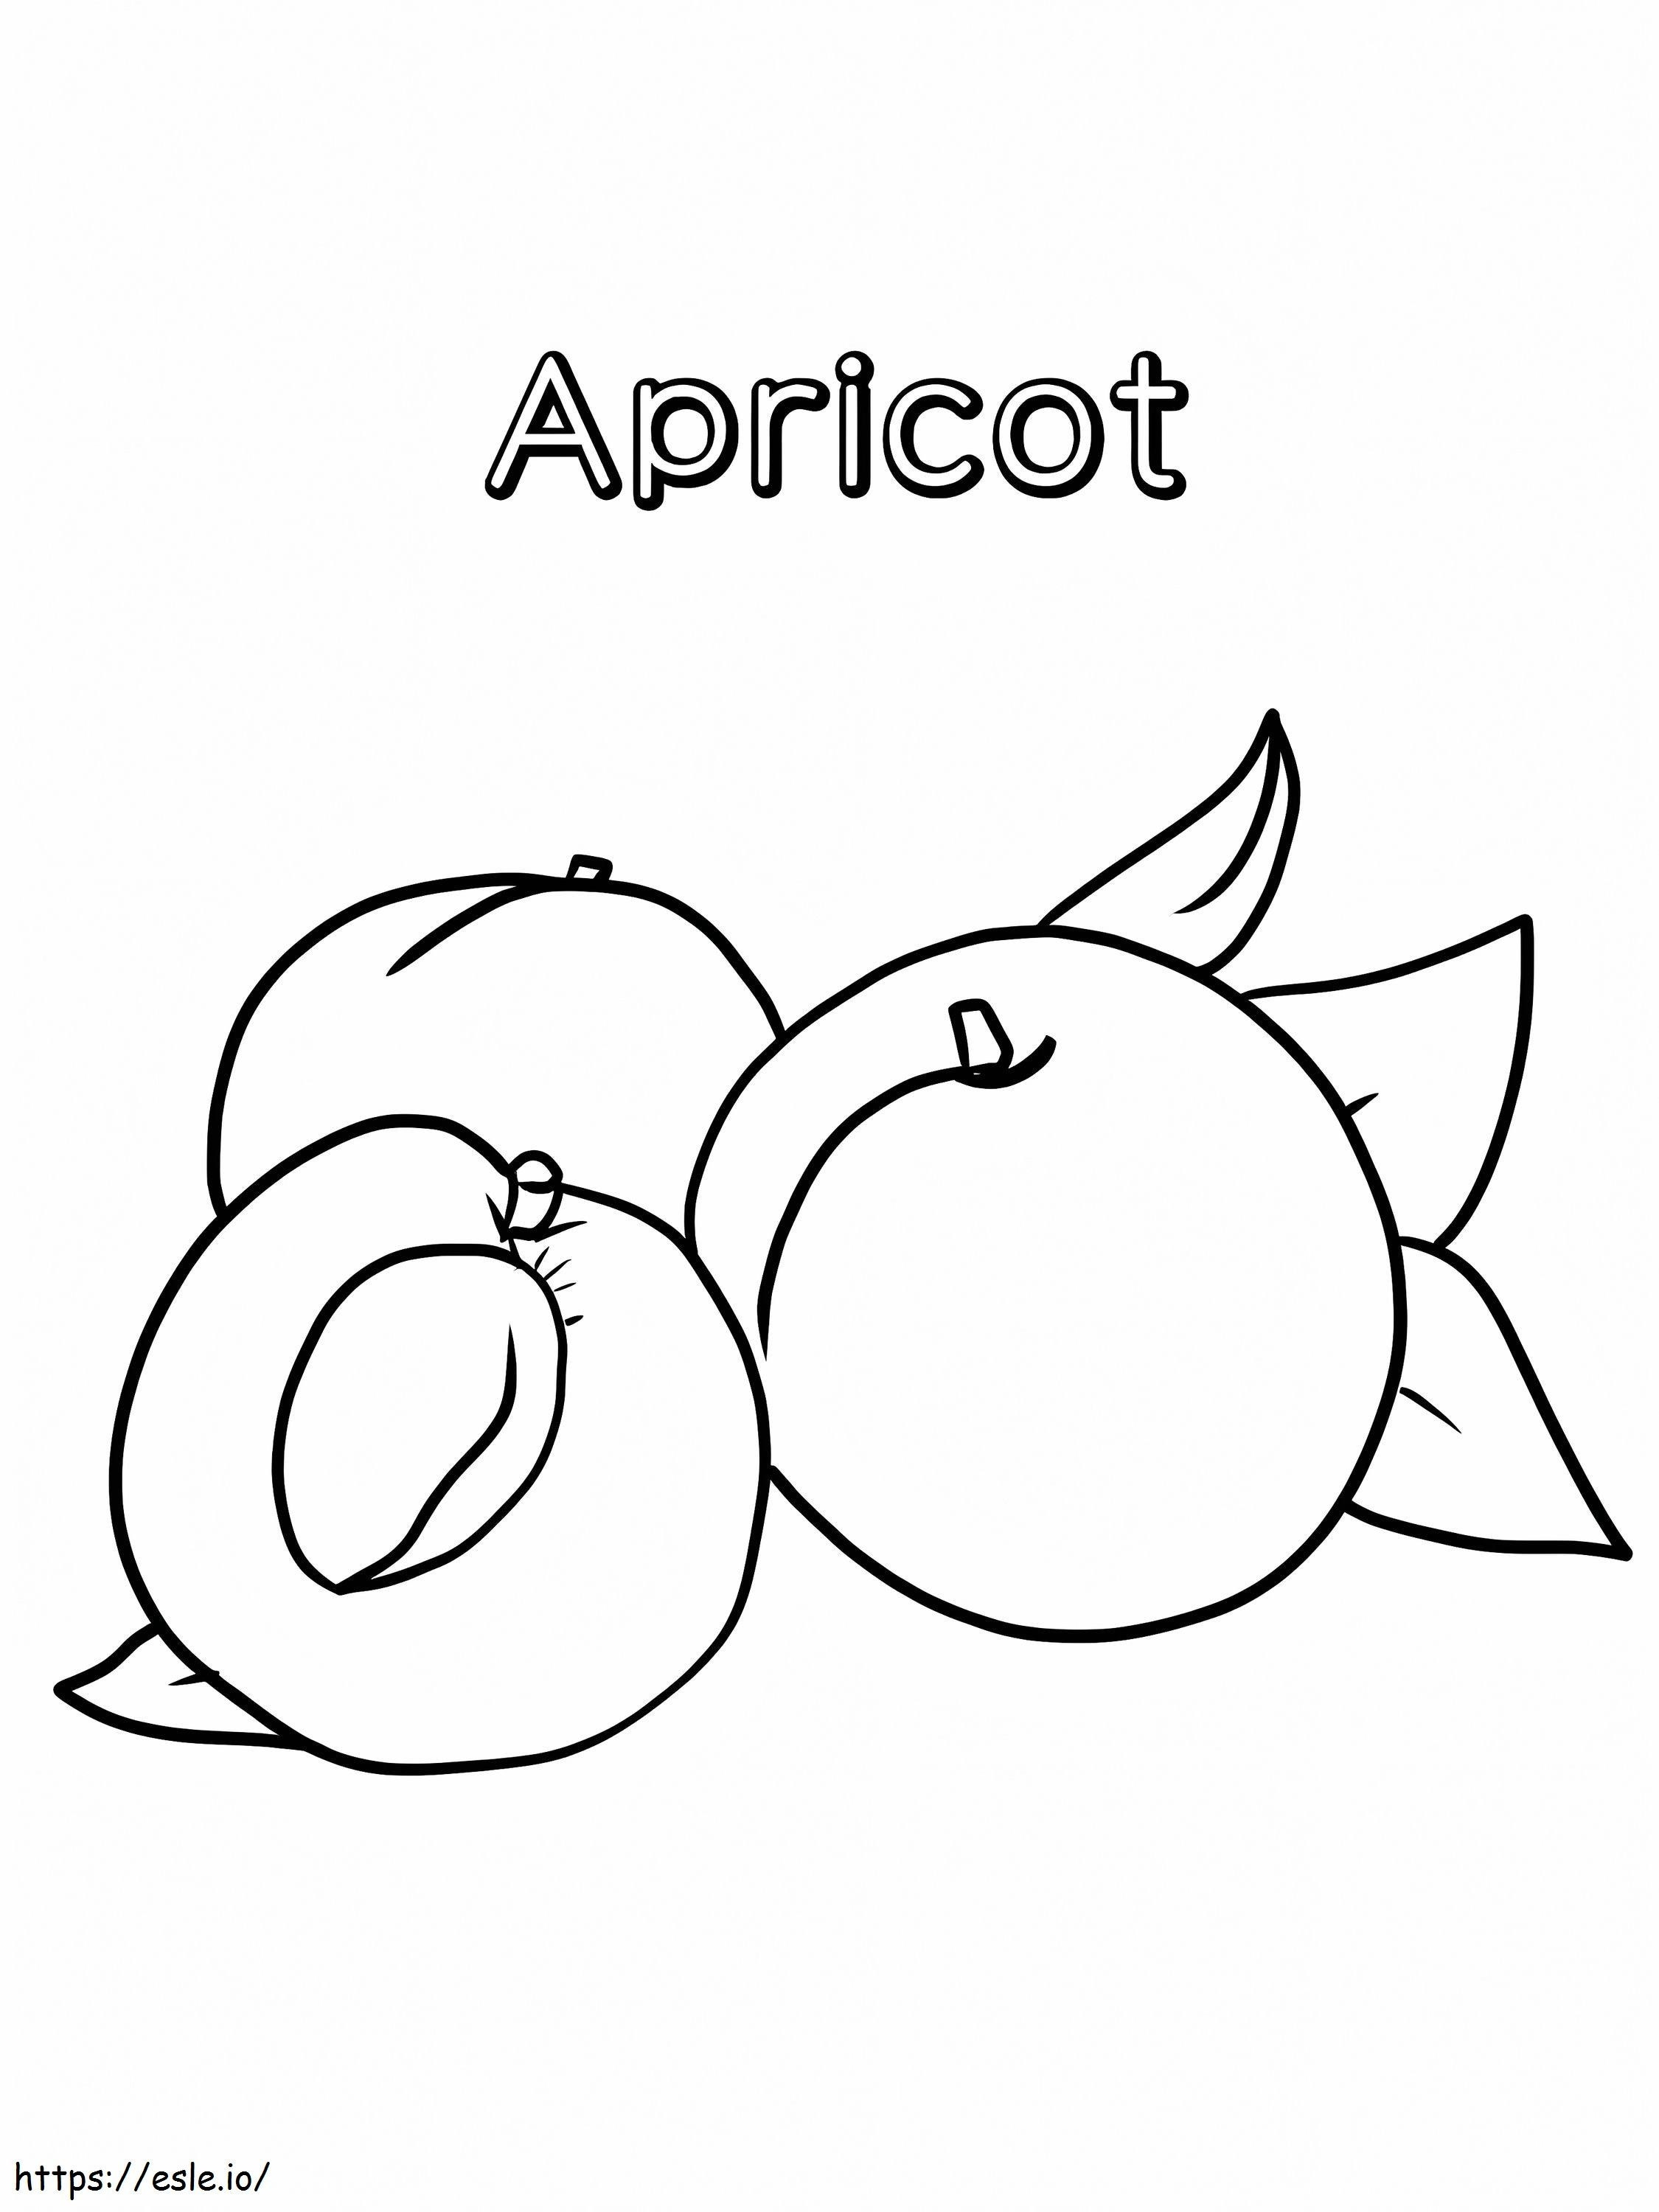 Big Apricot coloring page